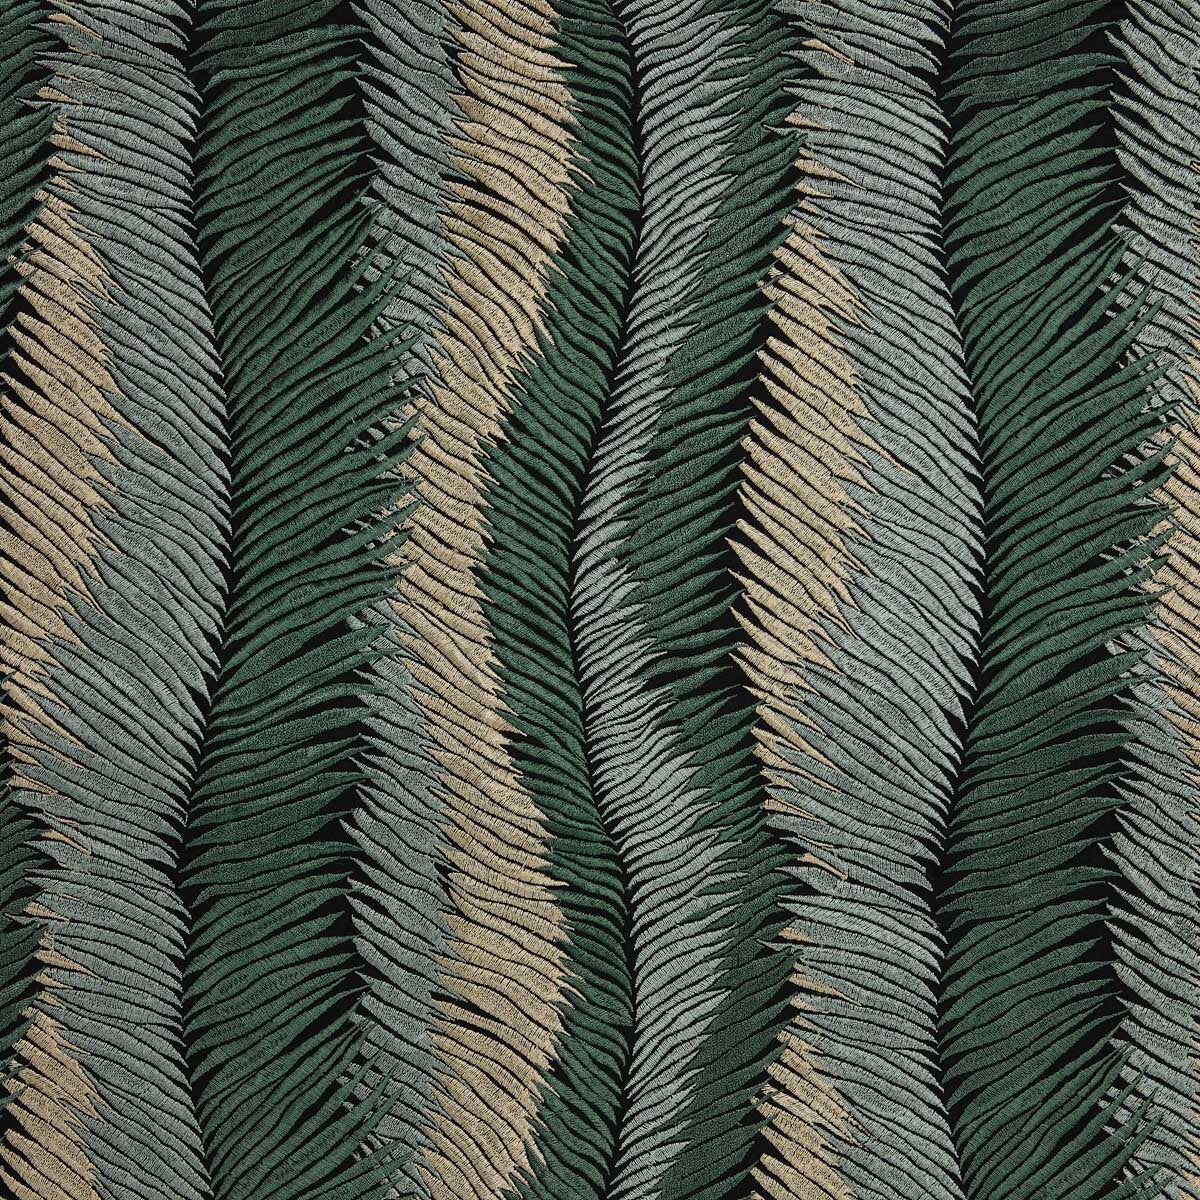 Plumage fabric in 4 color - pattern LZ-30414.04.0 - by Kravet Couture in the Lizzo collection